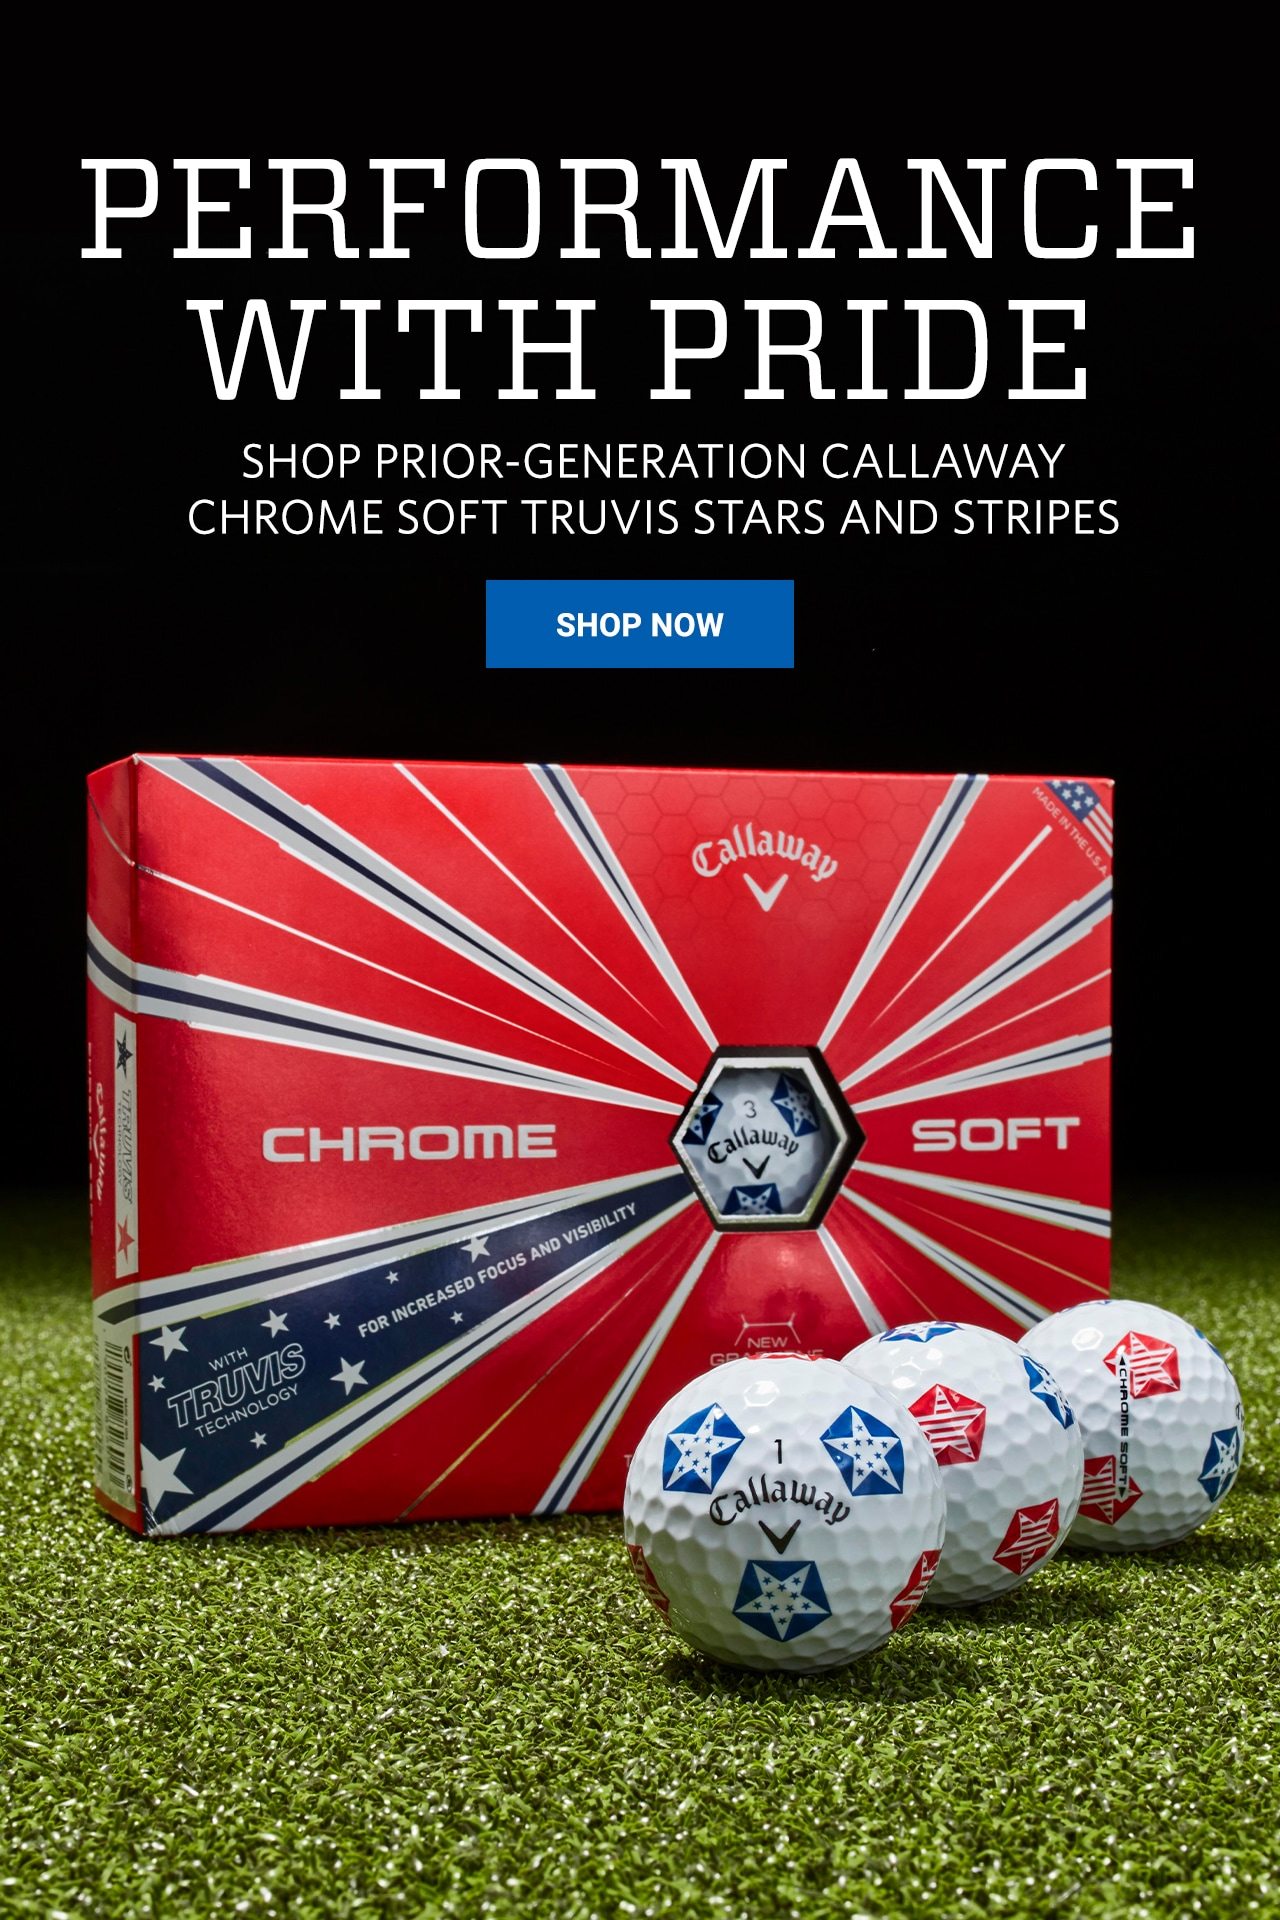 Performance With Pride. Shop Prior-Generation Callaway Chrome Soft Truvis Stars and Stripes. Shop Now.